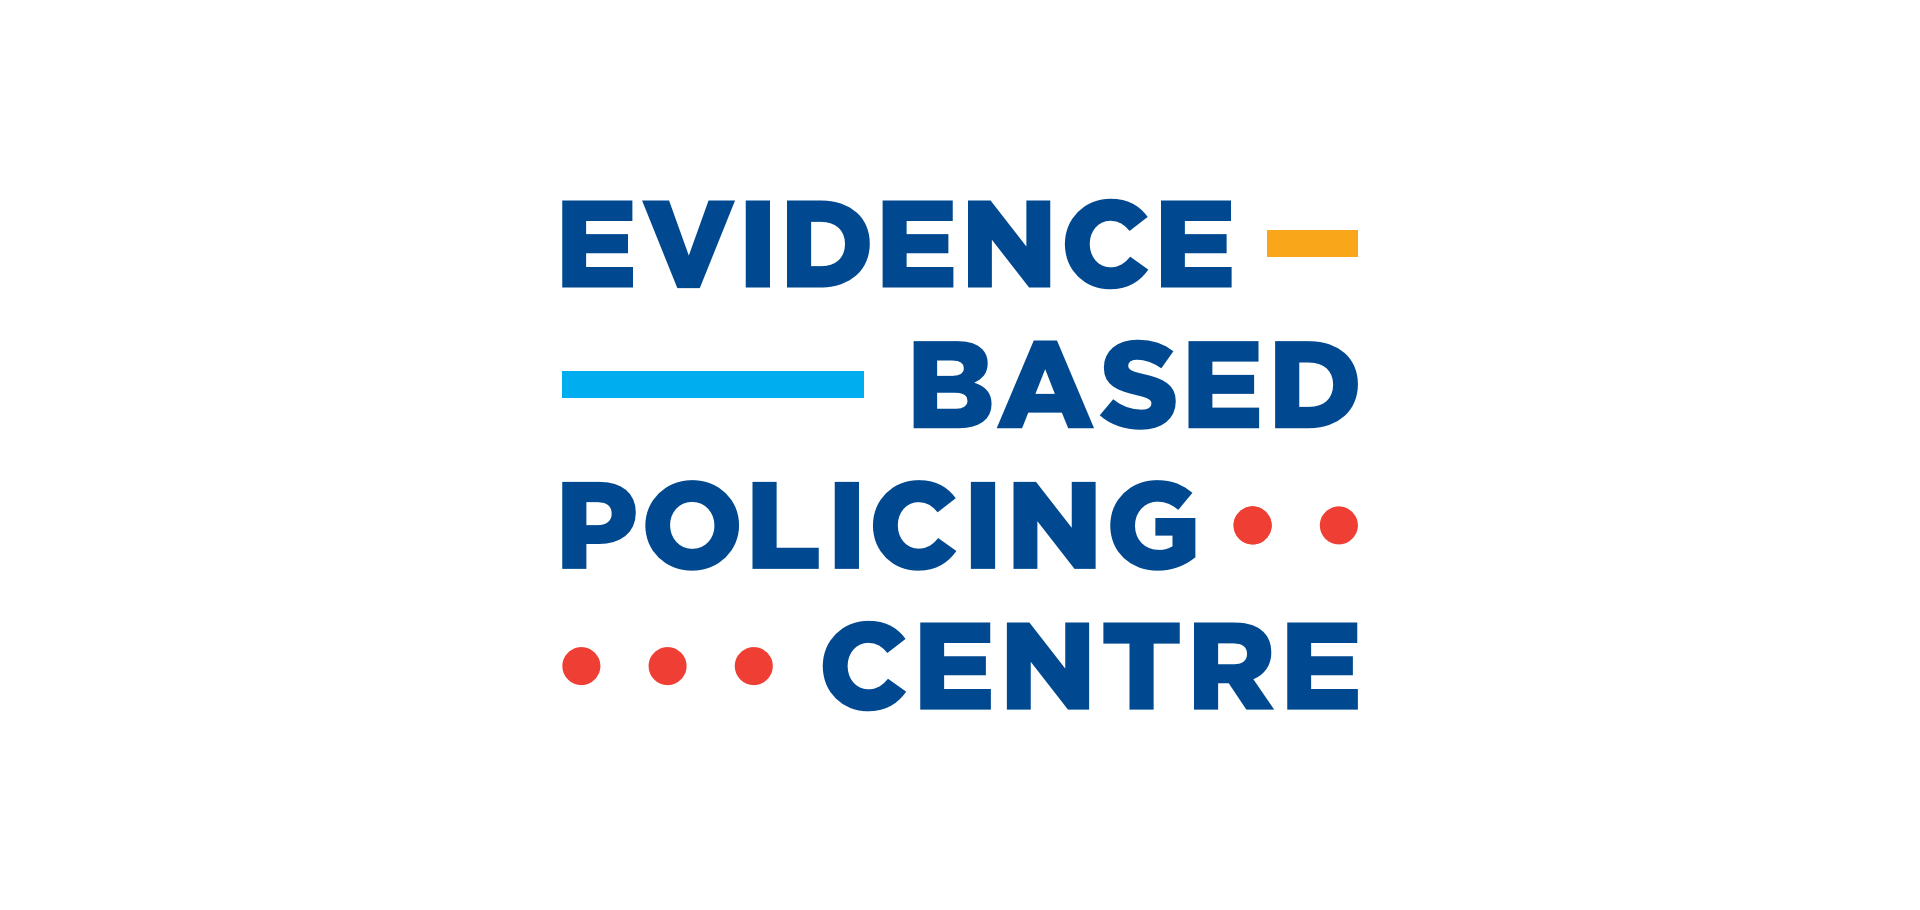 Using evidence to make a real and practical difference to policing in New Zealand. In partnership with @nzpolice @ESRNewZealand @waikato @vodafoneNZ